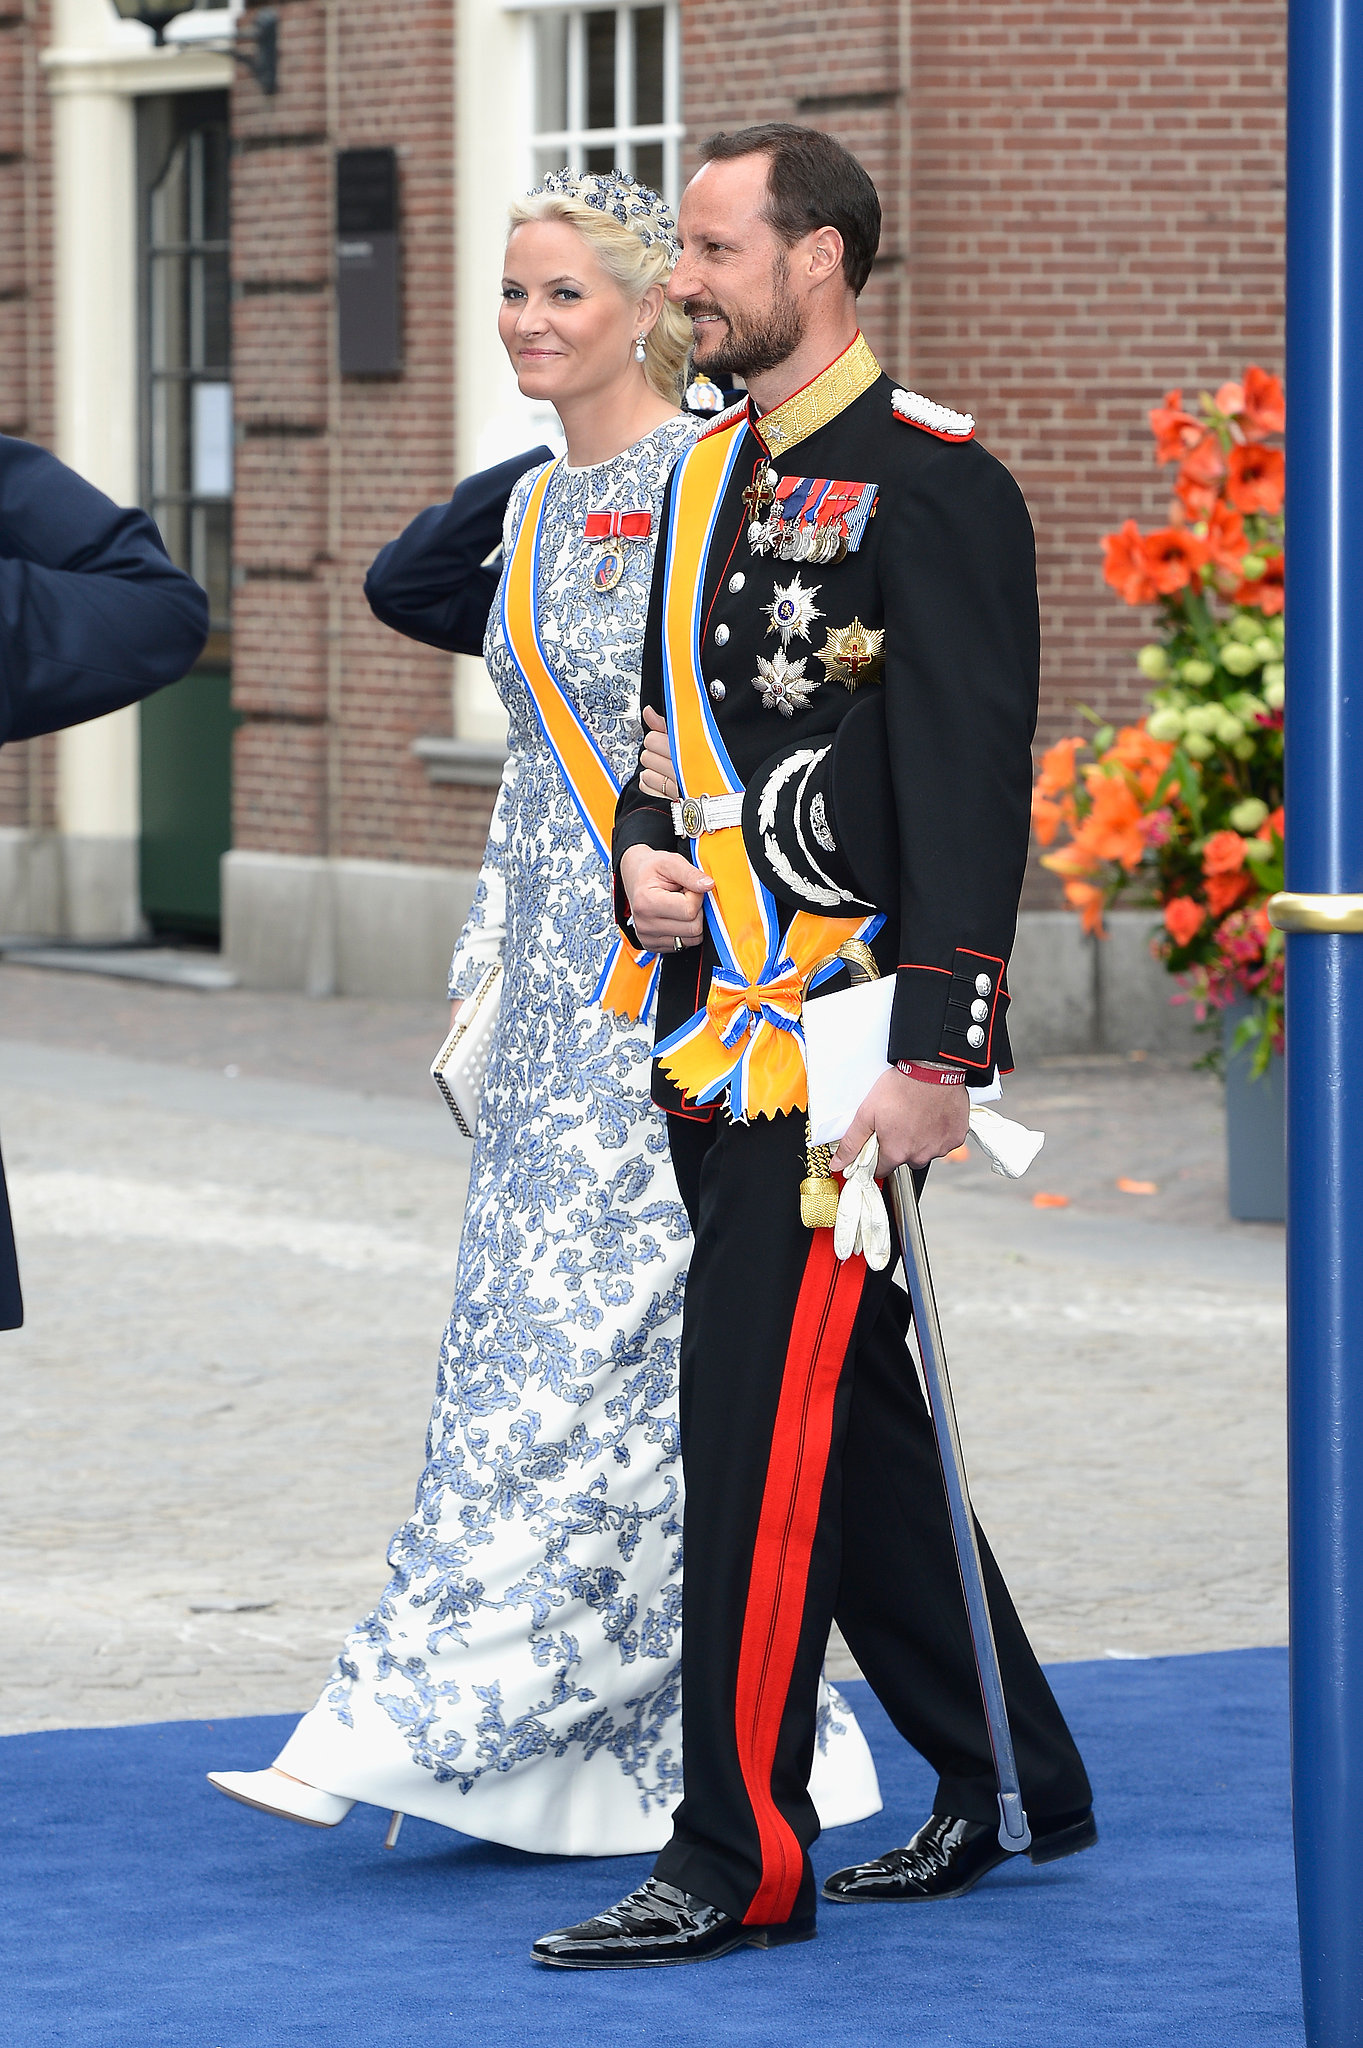 Crown Prince Haakon And Crown Princess Mette Marit Of Norway Made An Royals From Around The